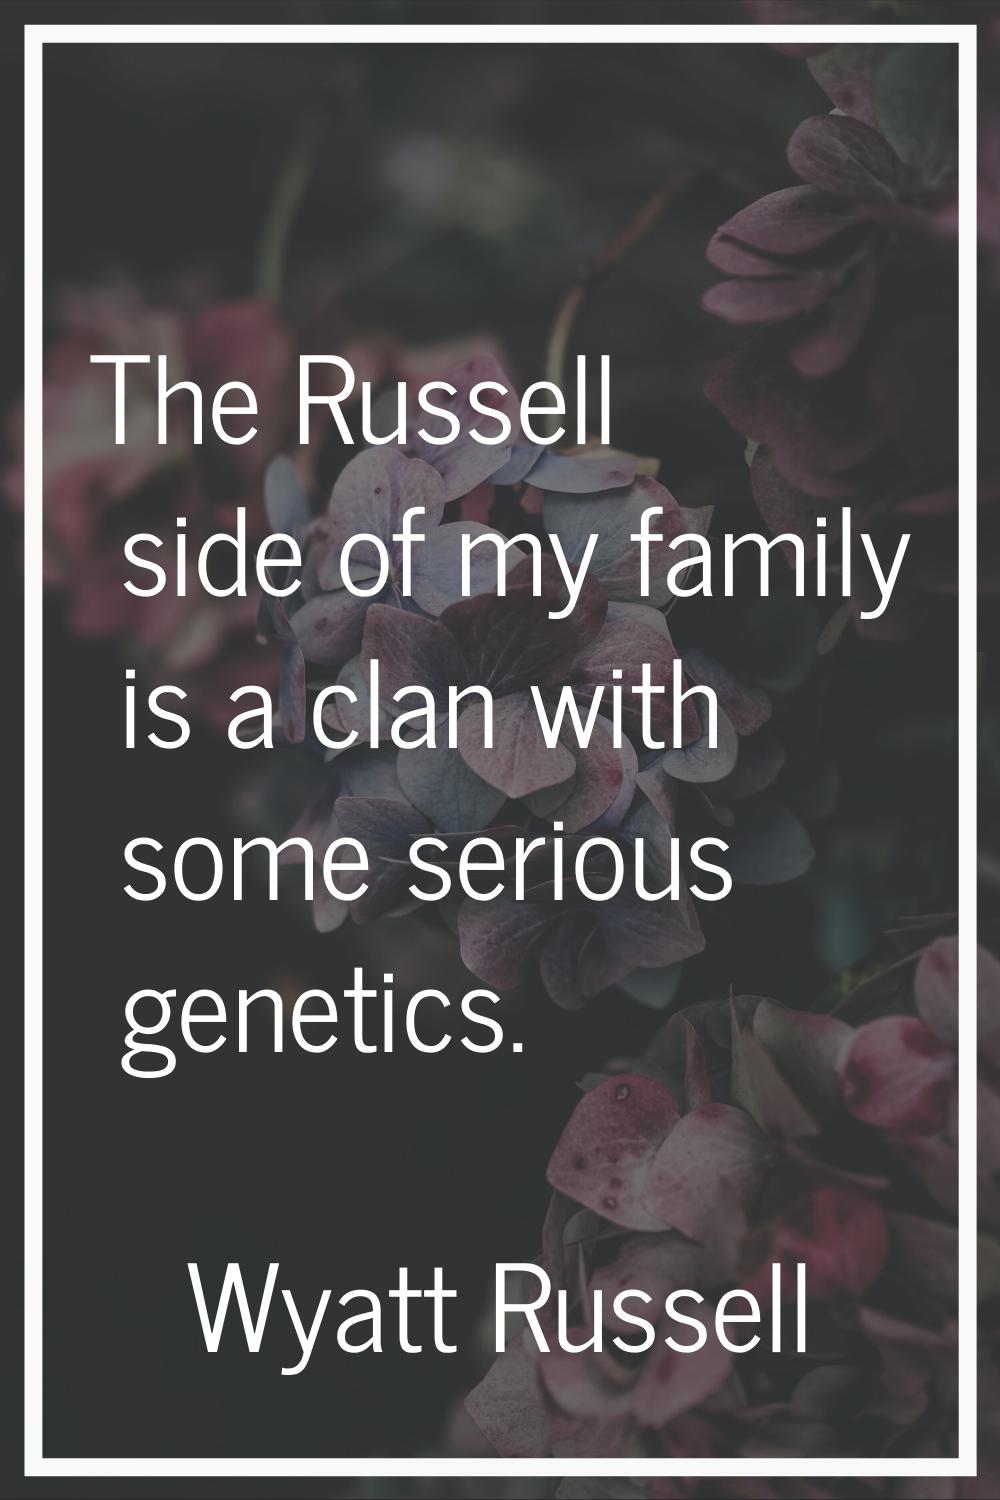 The Russell side of my family is a clan with some serious genetics.